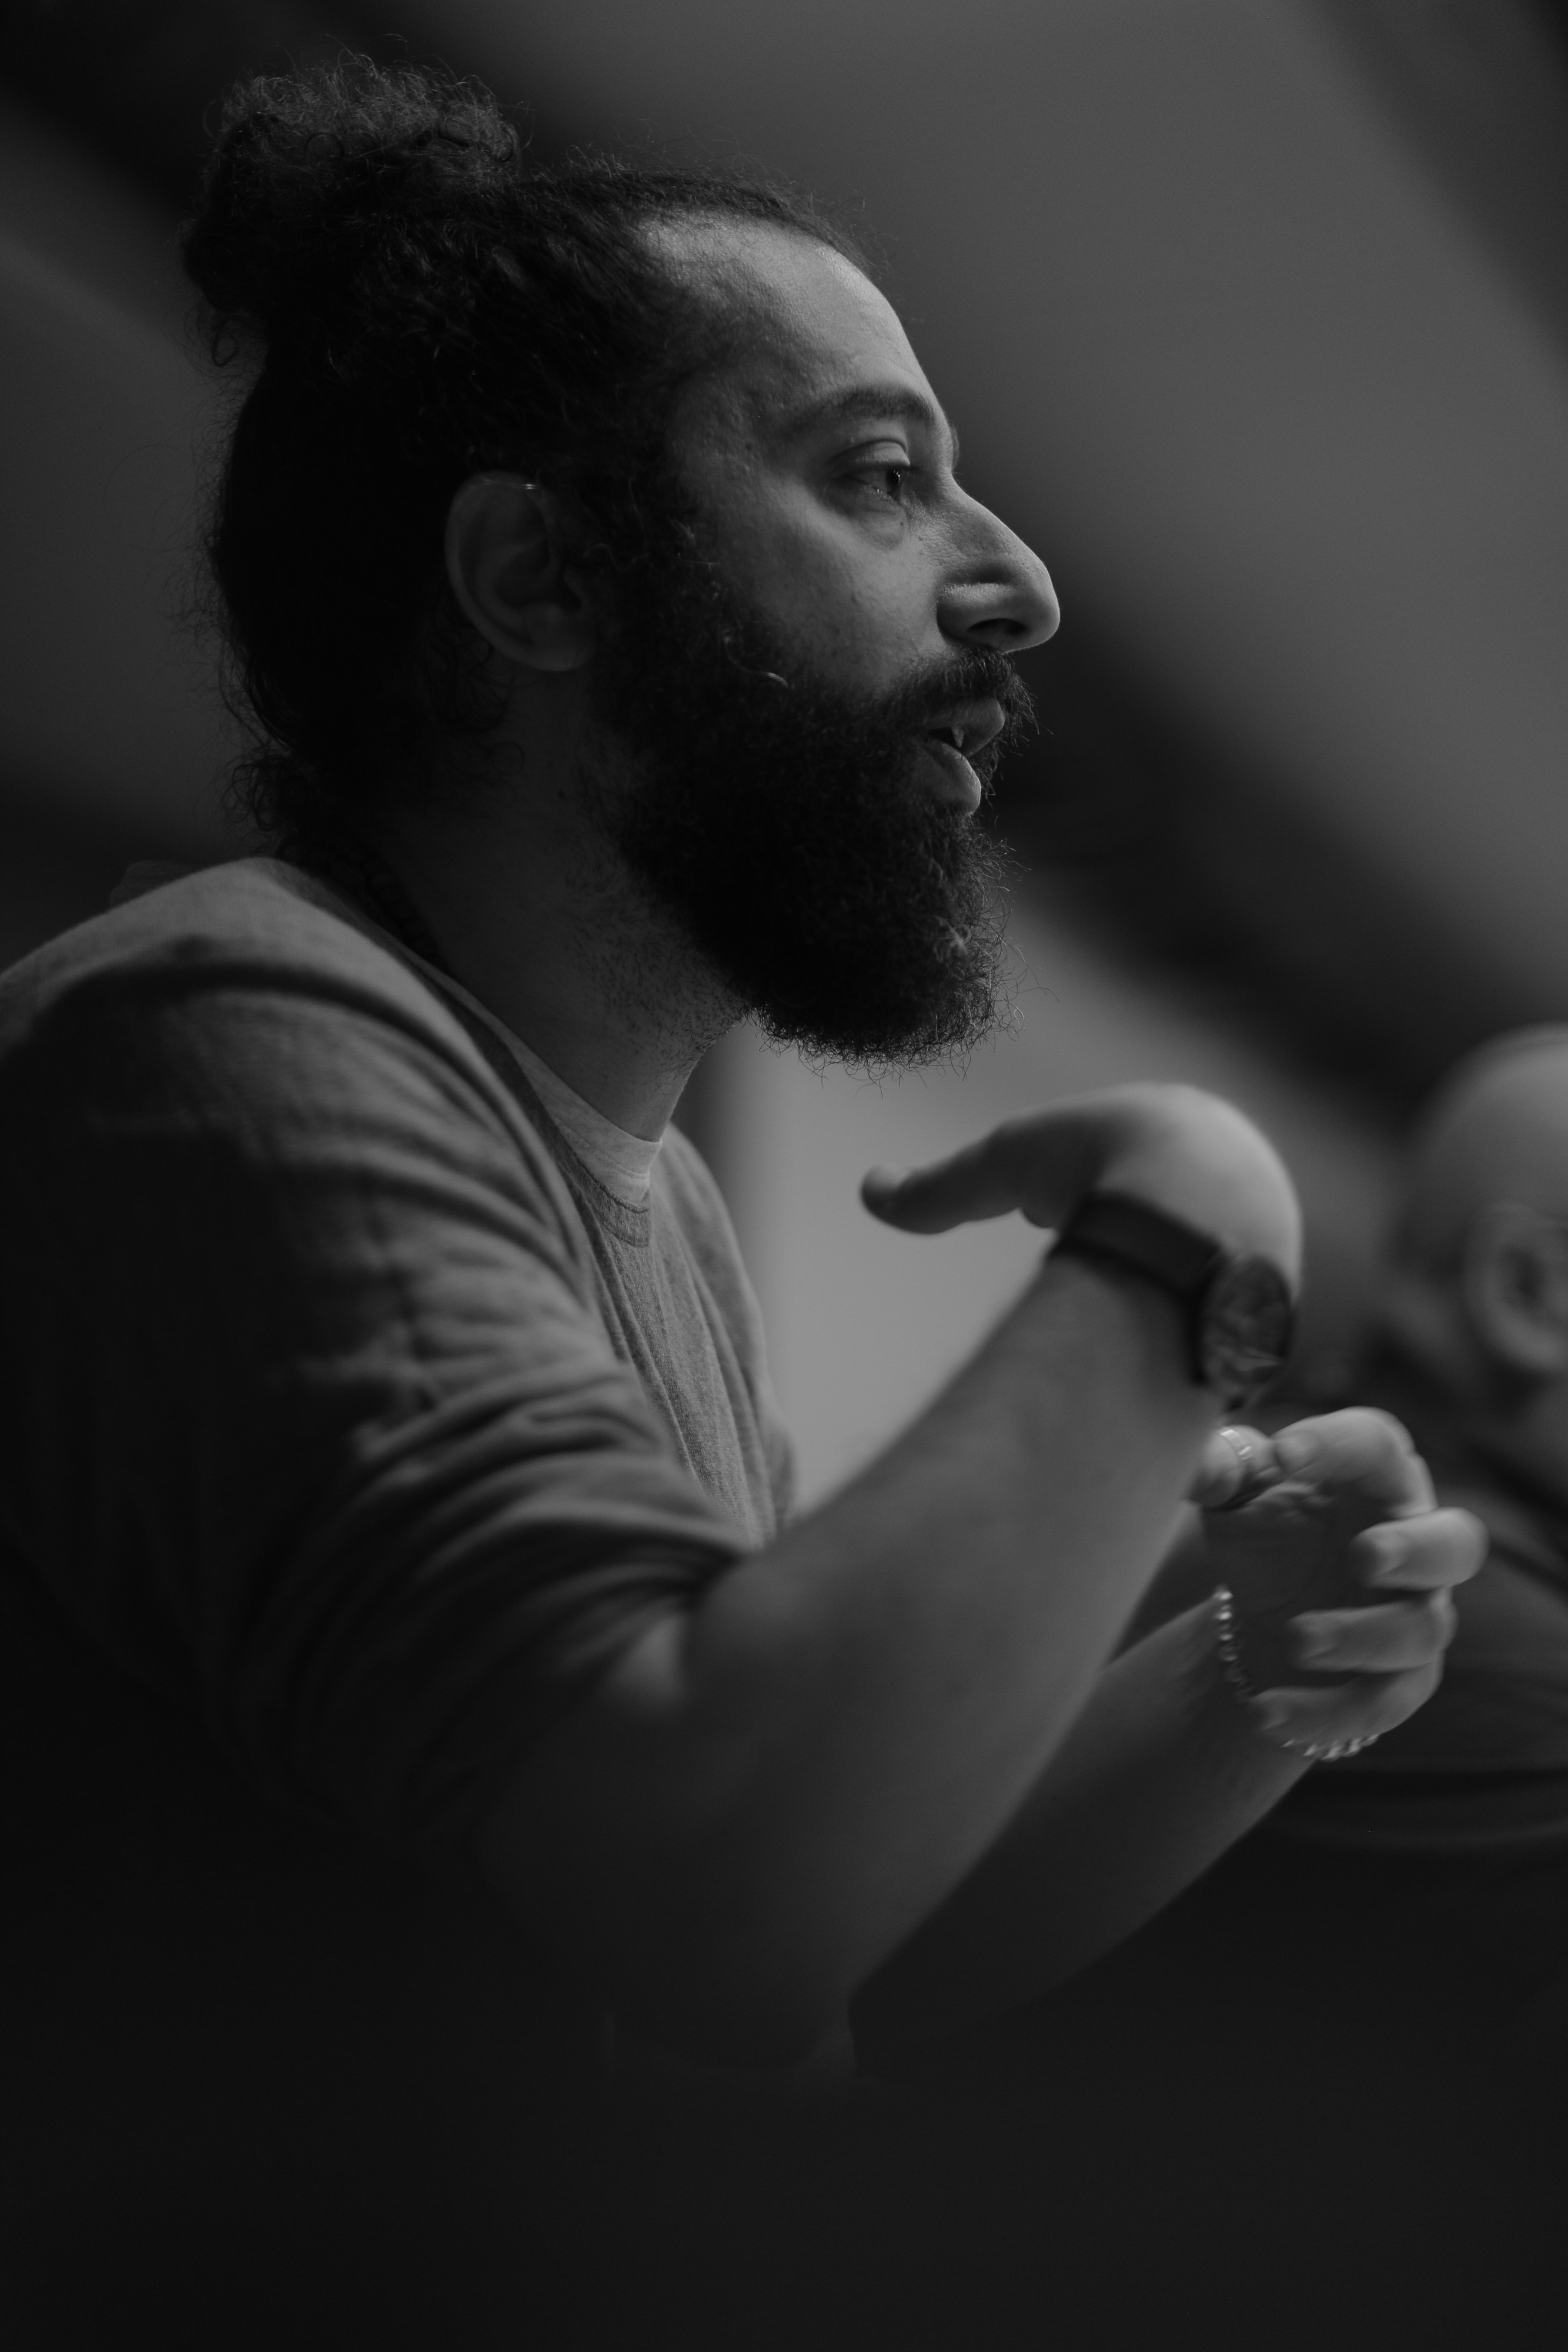 Ahmad Alhmallah is shown in a black-and-white portrait-oriented photograph, cropped from the torso up. He is shown in profile, his long hair up in a bun. He is wearing a t-shirt and gesturing with his arms as the photograph captured him mid-speech.